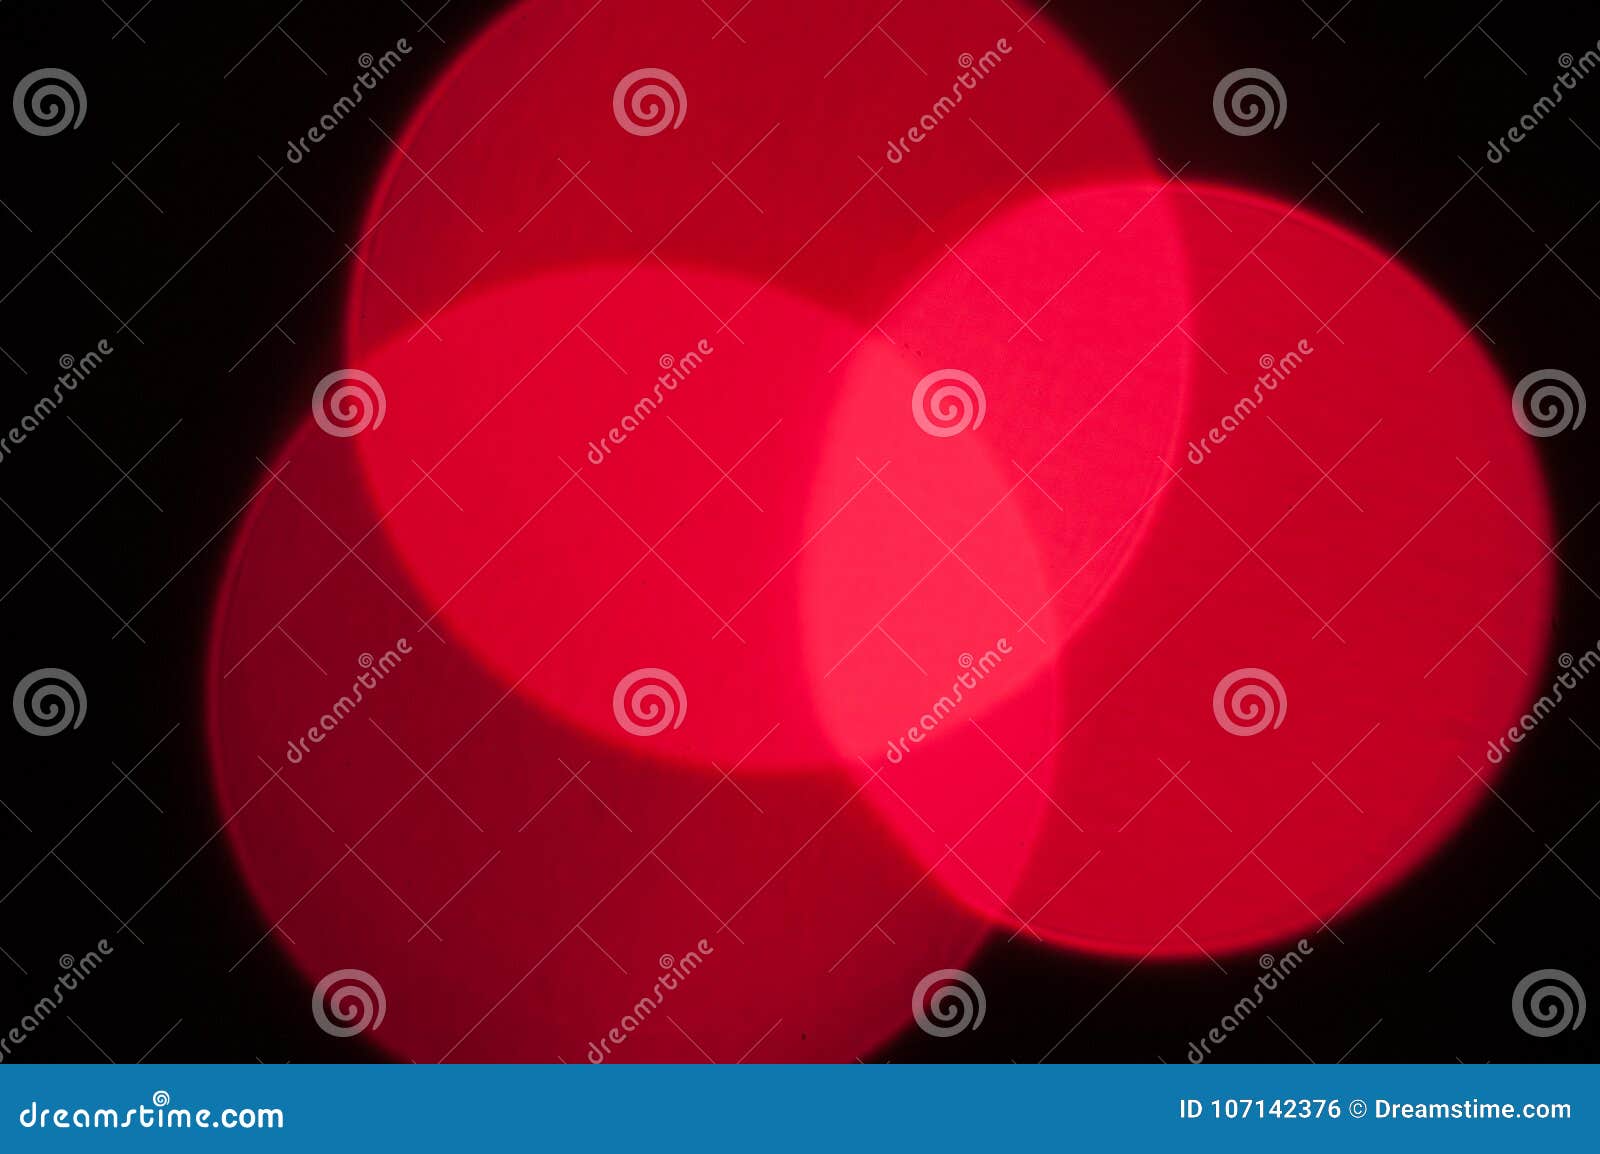 abstract circle red intersection lights